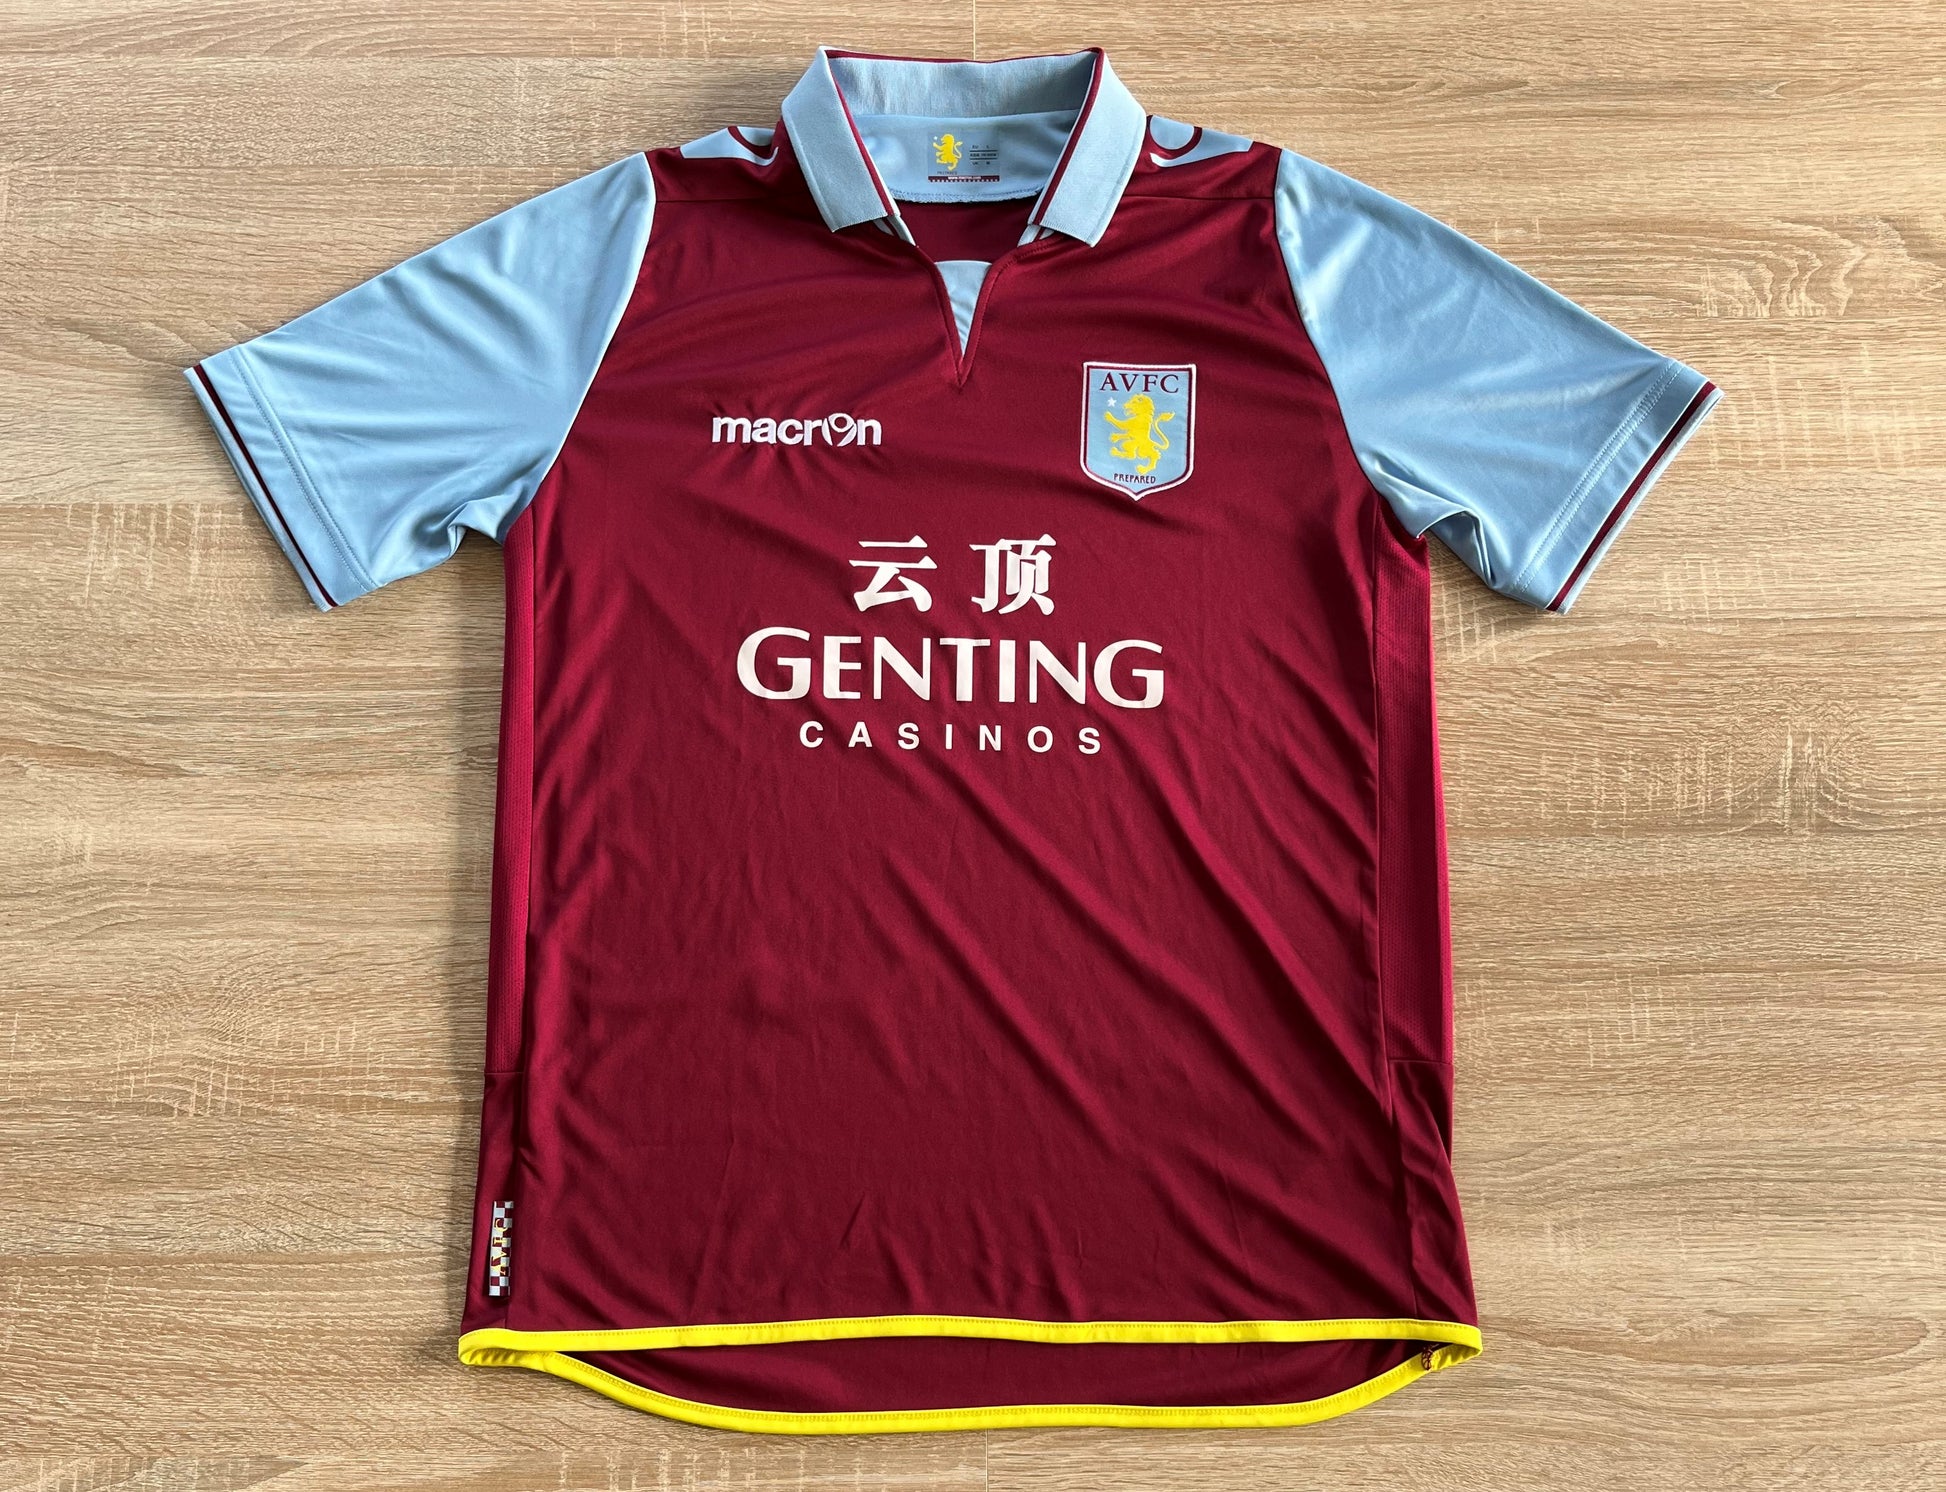 Aston Villa Home Shirt from 2012-2013: The home jersey worn by Aston Villa during the 2012-2013 season. This shirt features the club's emblem and captures the essence of the team's performance and commitment throughout that memorable period.